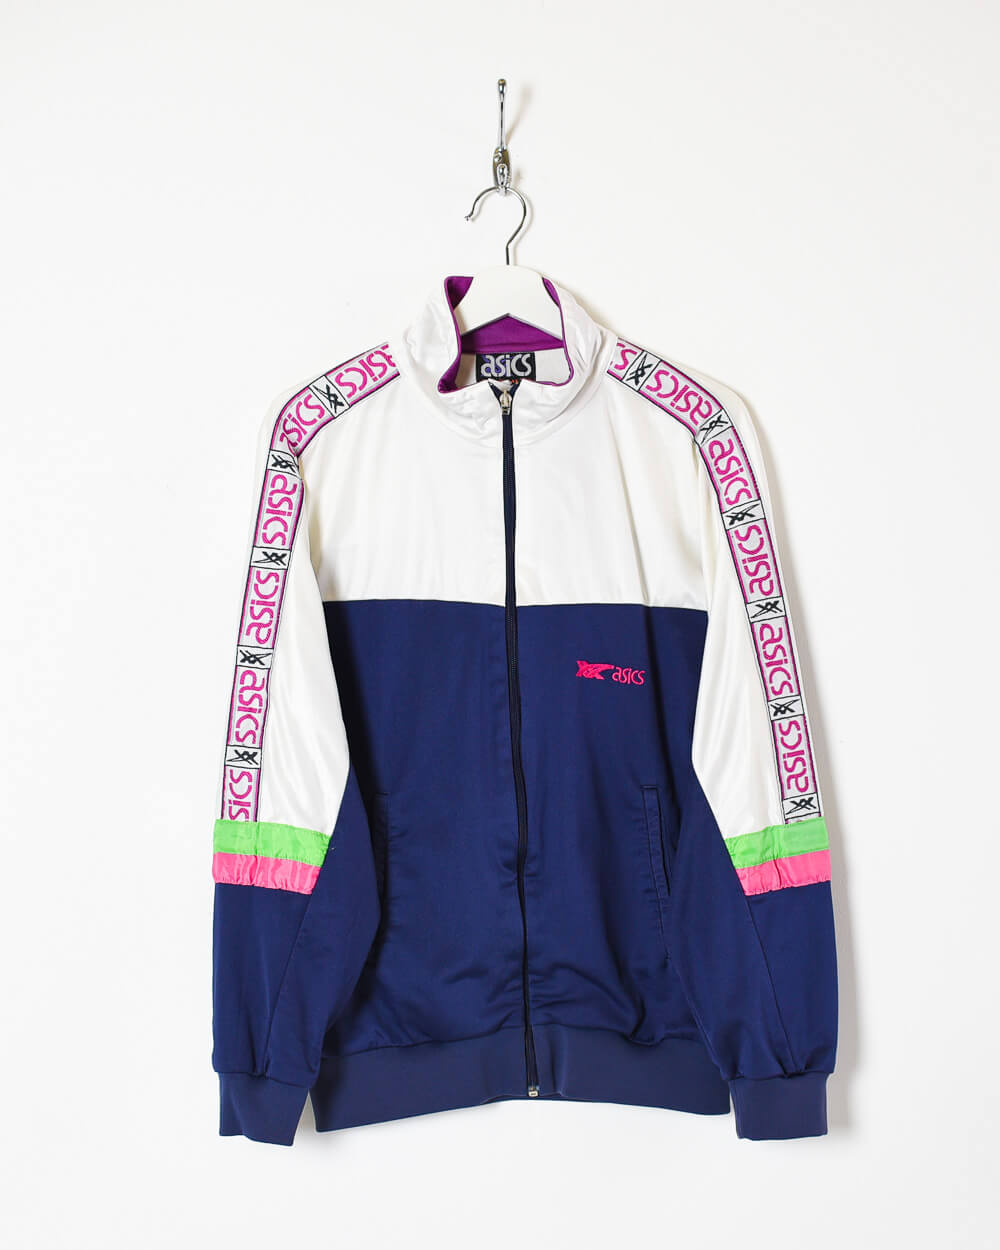 White Asics Tracksuit Top - Small